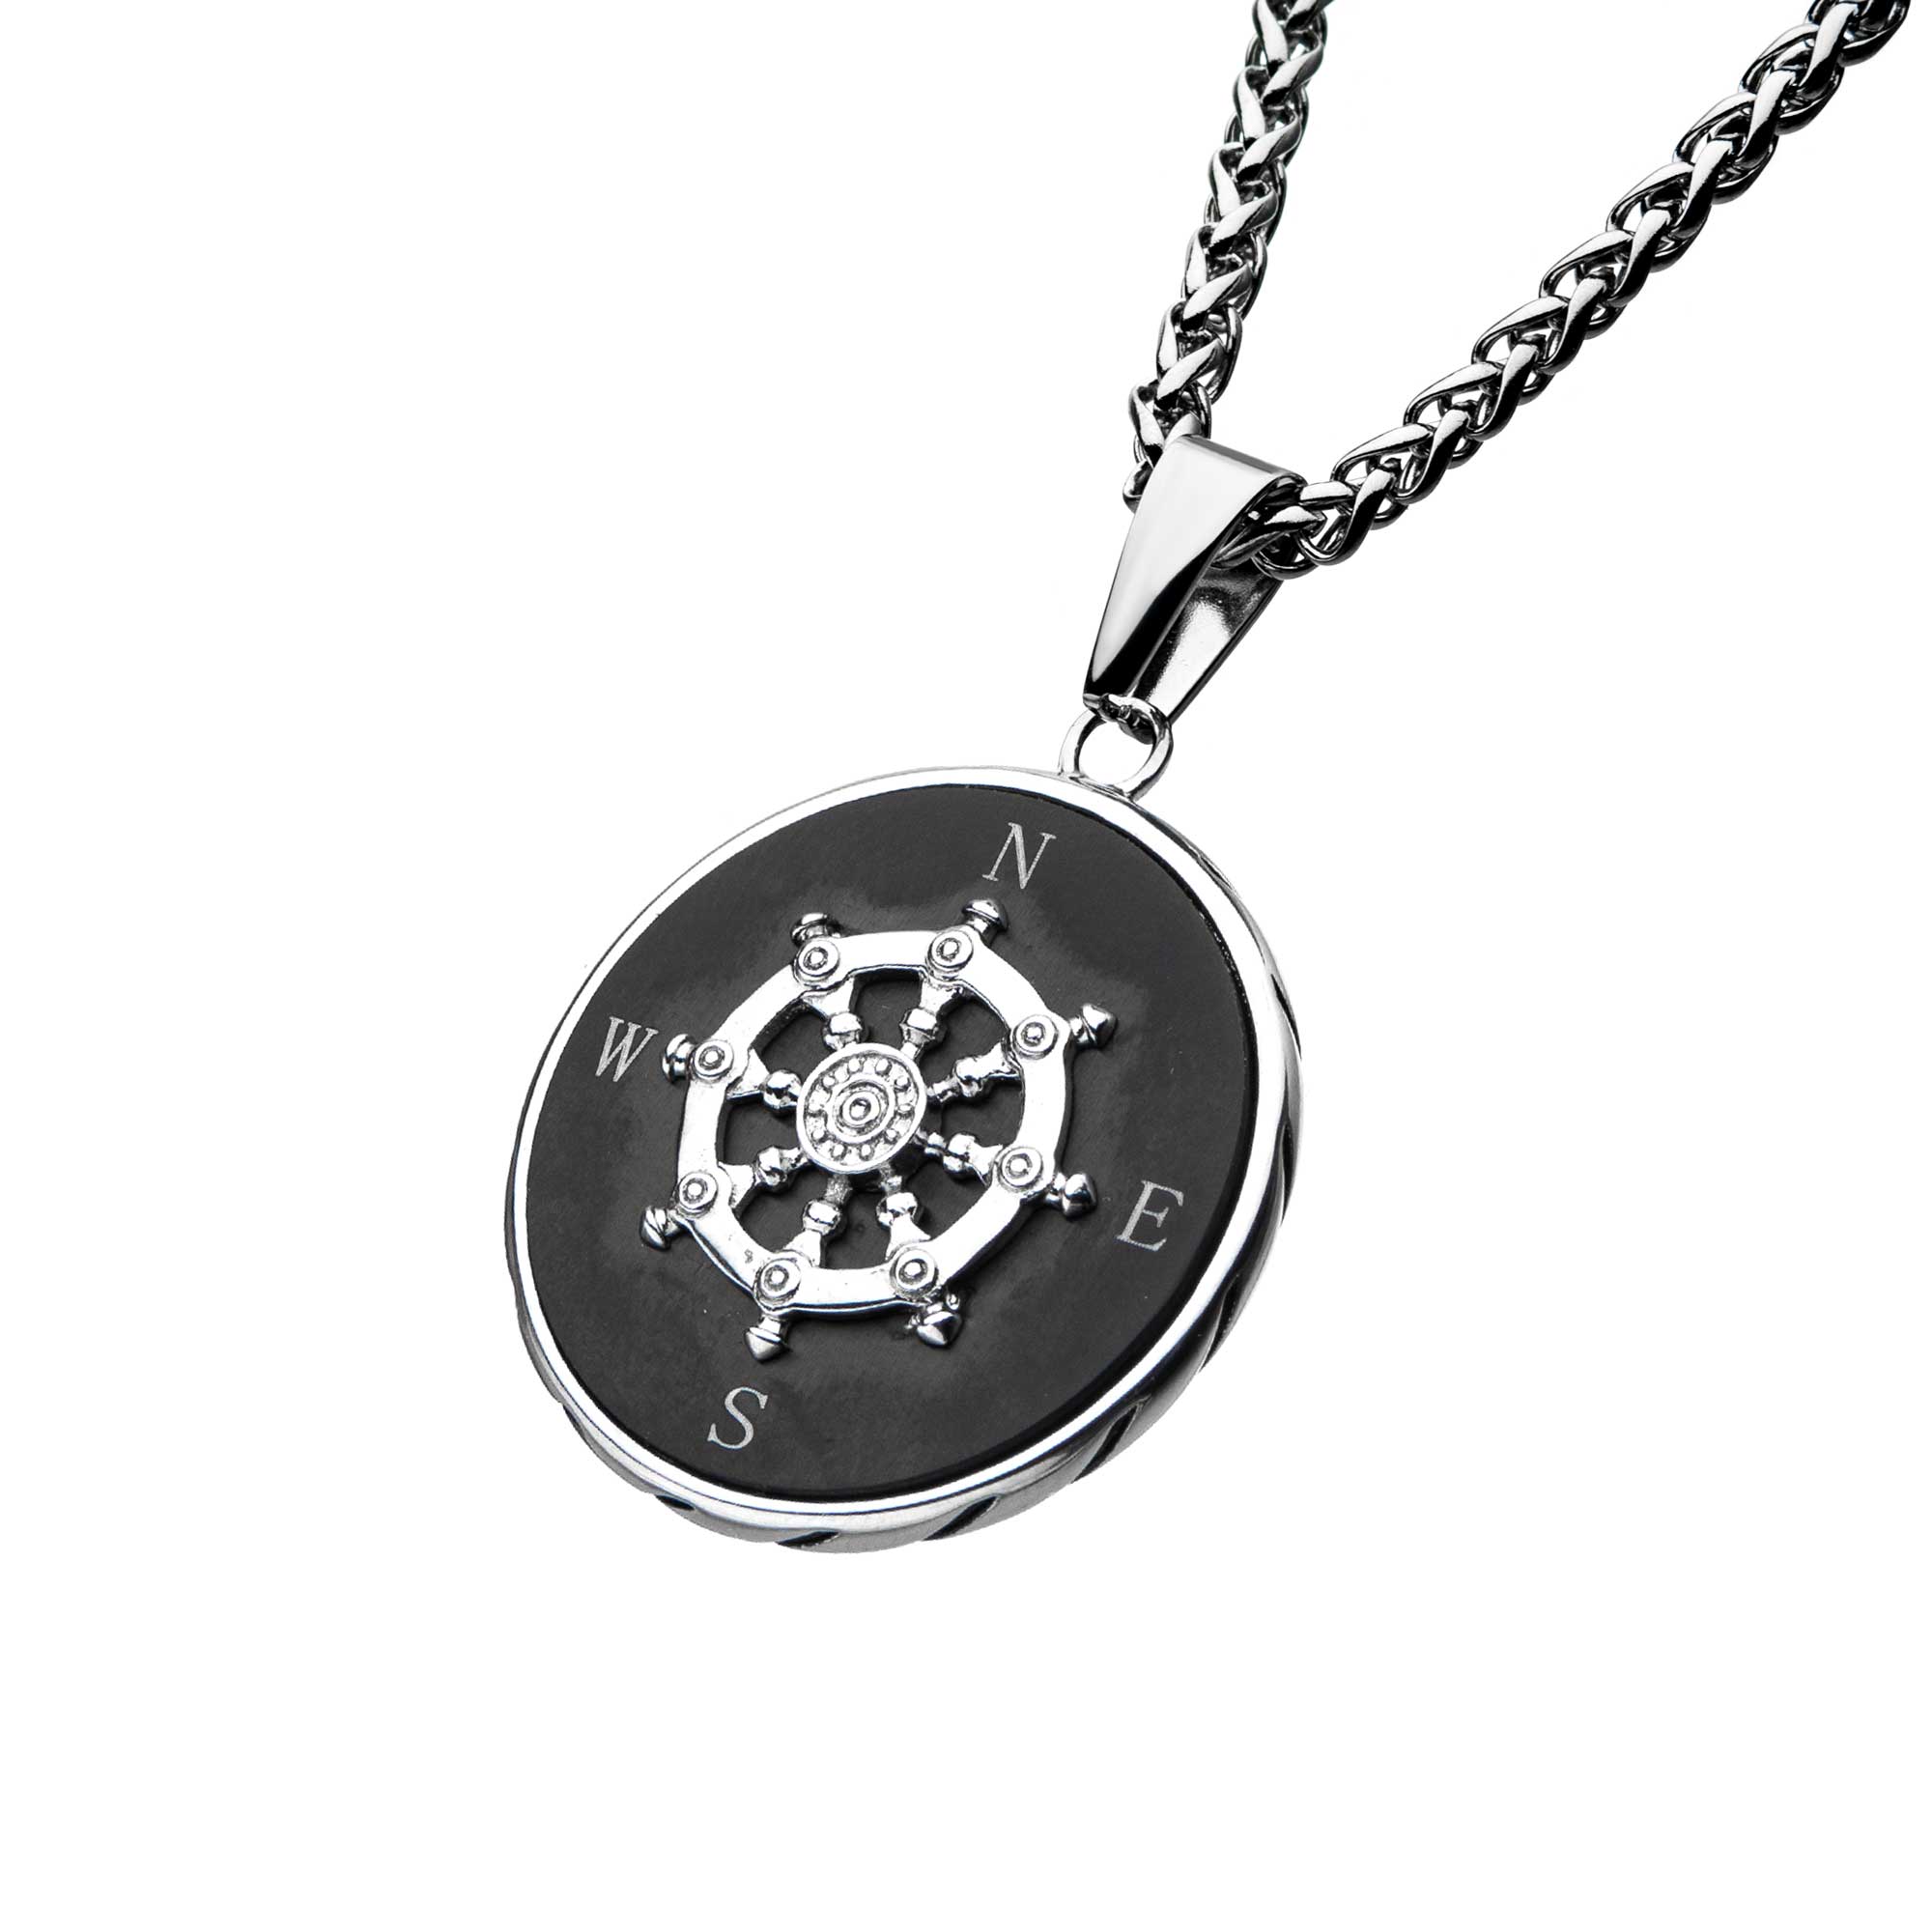 Stainless Steel Black Plated Ship's Wheel Compass Pendant with Chain Image 2 Morin Jewelers Southbridge, MA